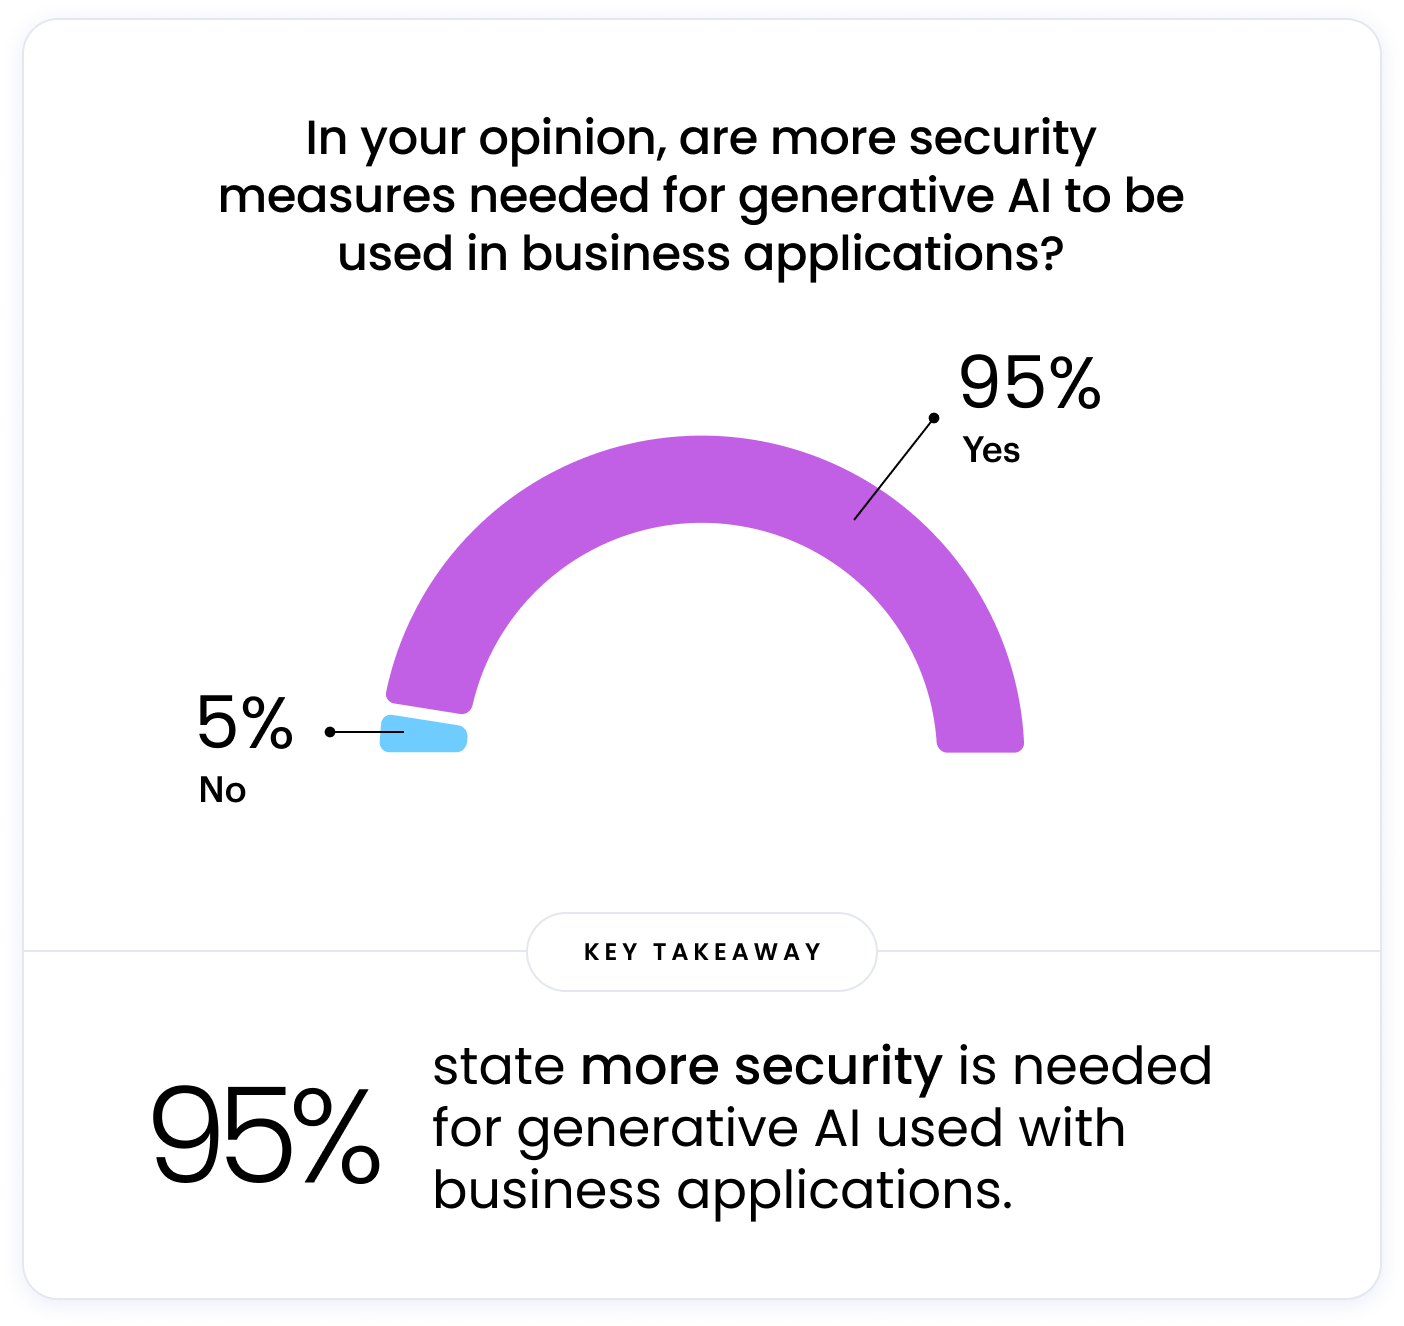 The image is a chart that shows the percentage of people who think that more security measures are needed for generative AI to be used in business applications. 95% of people think that more security measures are needed.